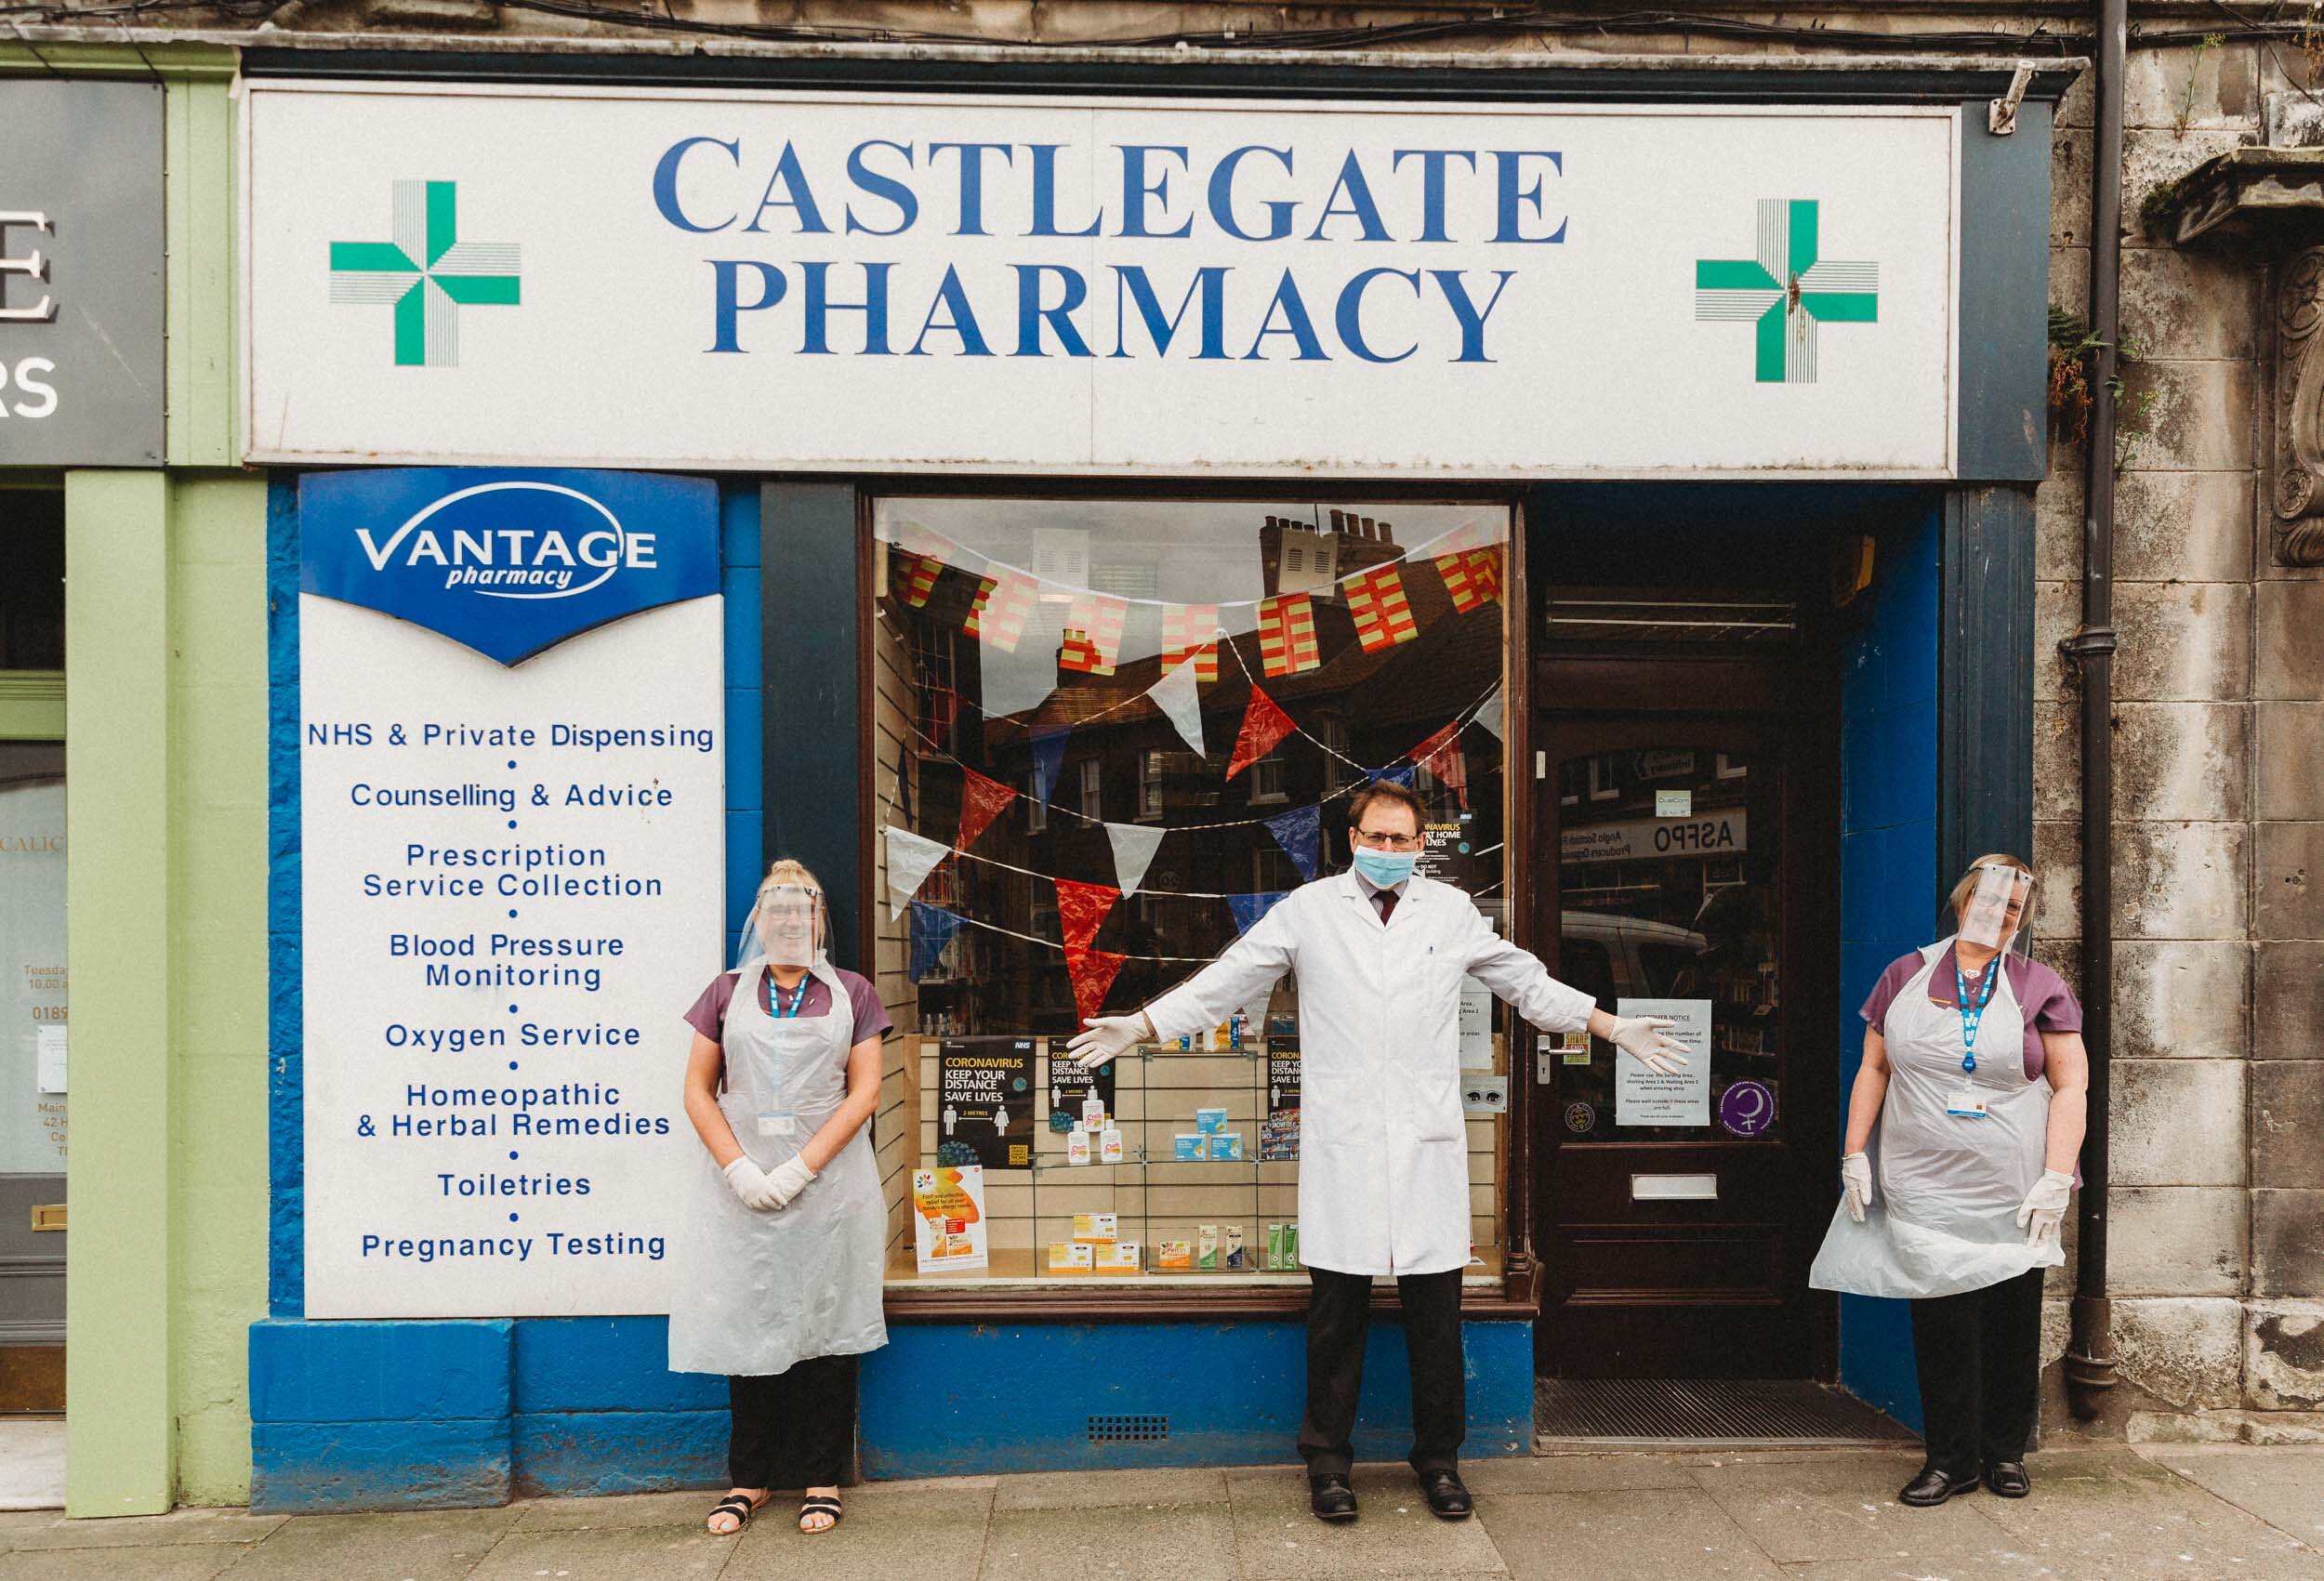  "It's business as usual here but the patients have been so appreciative" - Susan, Stuart and Alison, Castlegate Pharmacy 